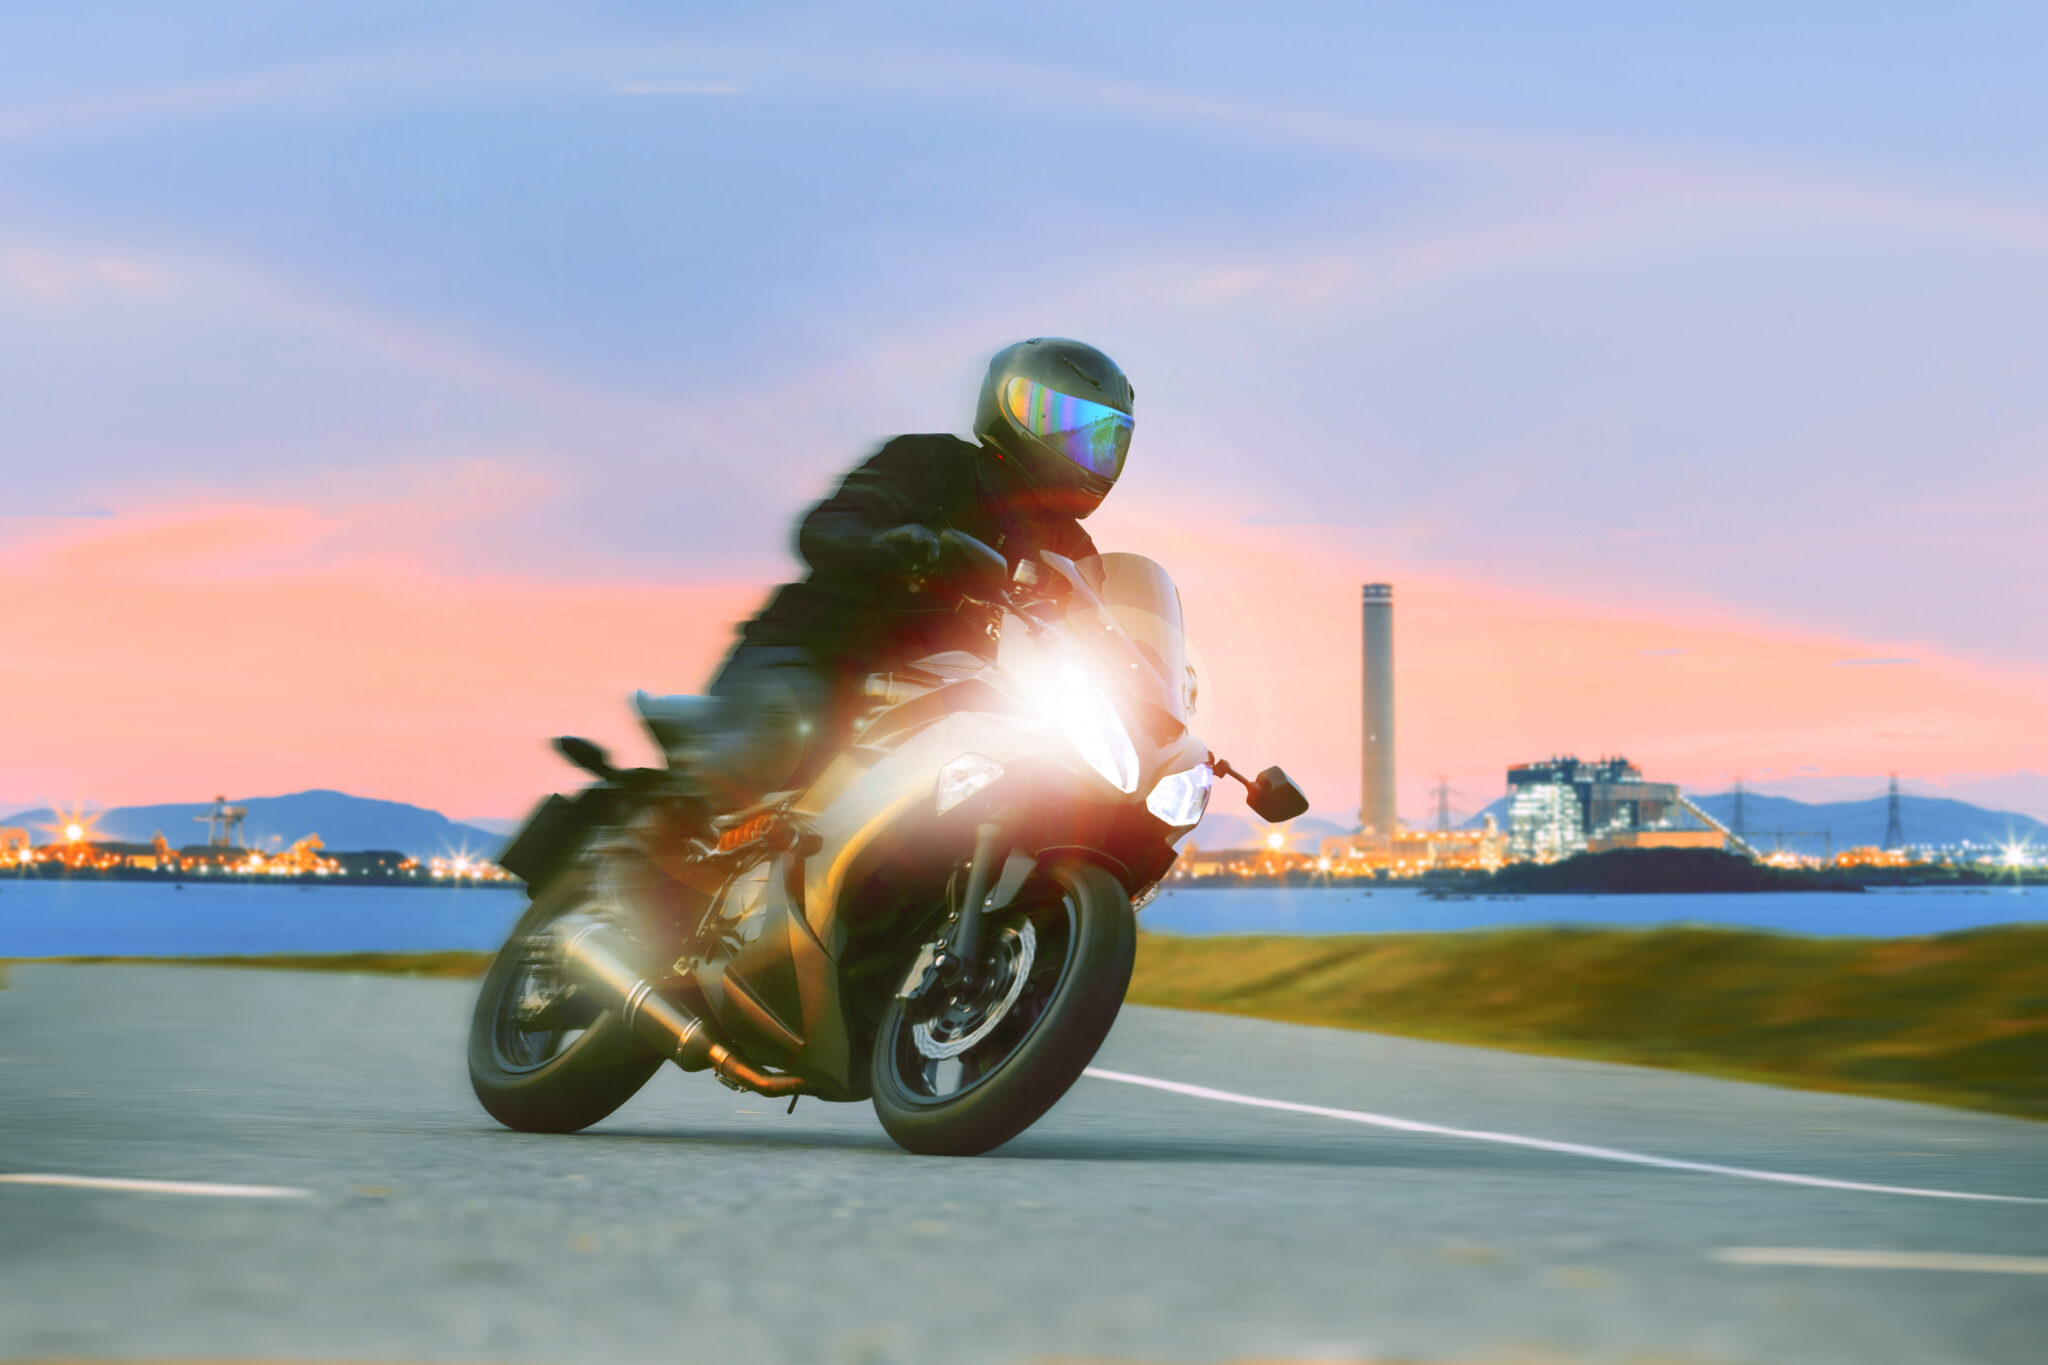 Motorcycle Insurance For New Riders: The Best Coverage and Companies | WalletGenius